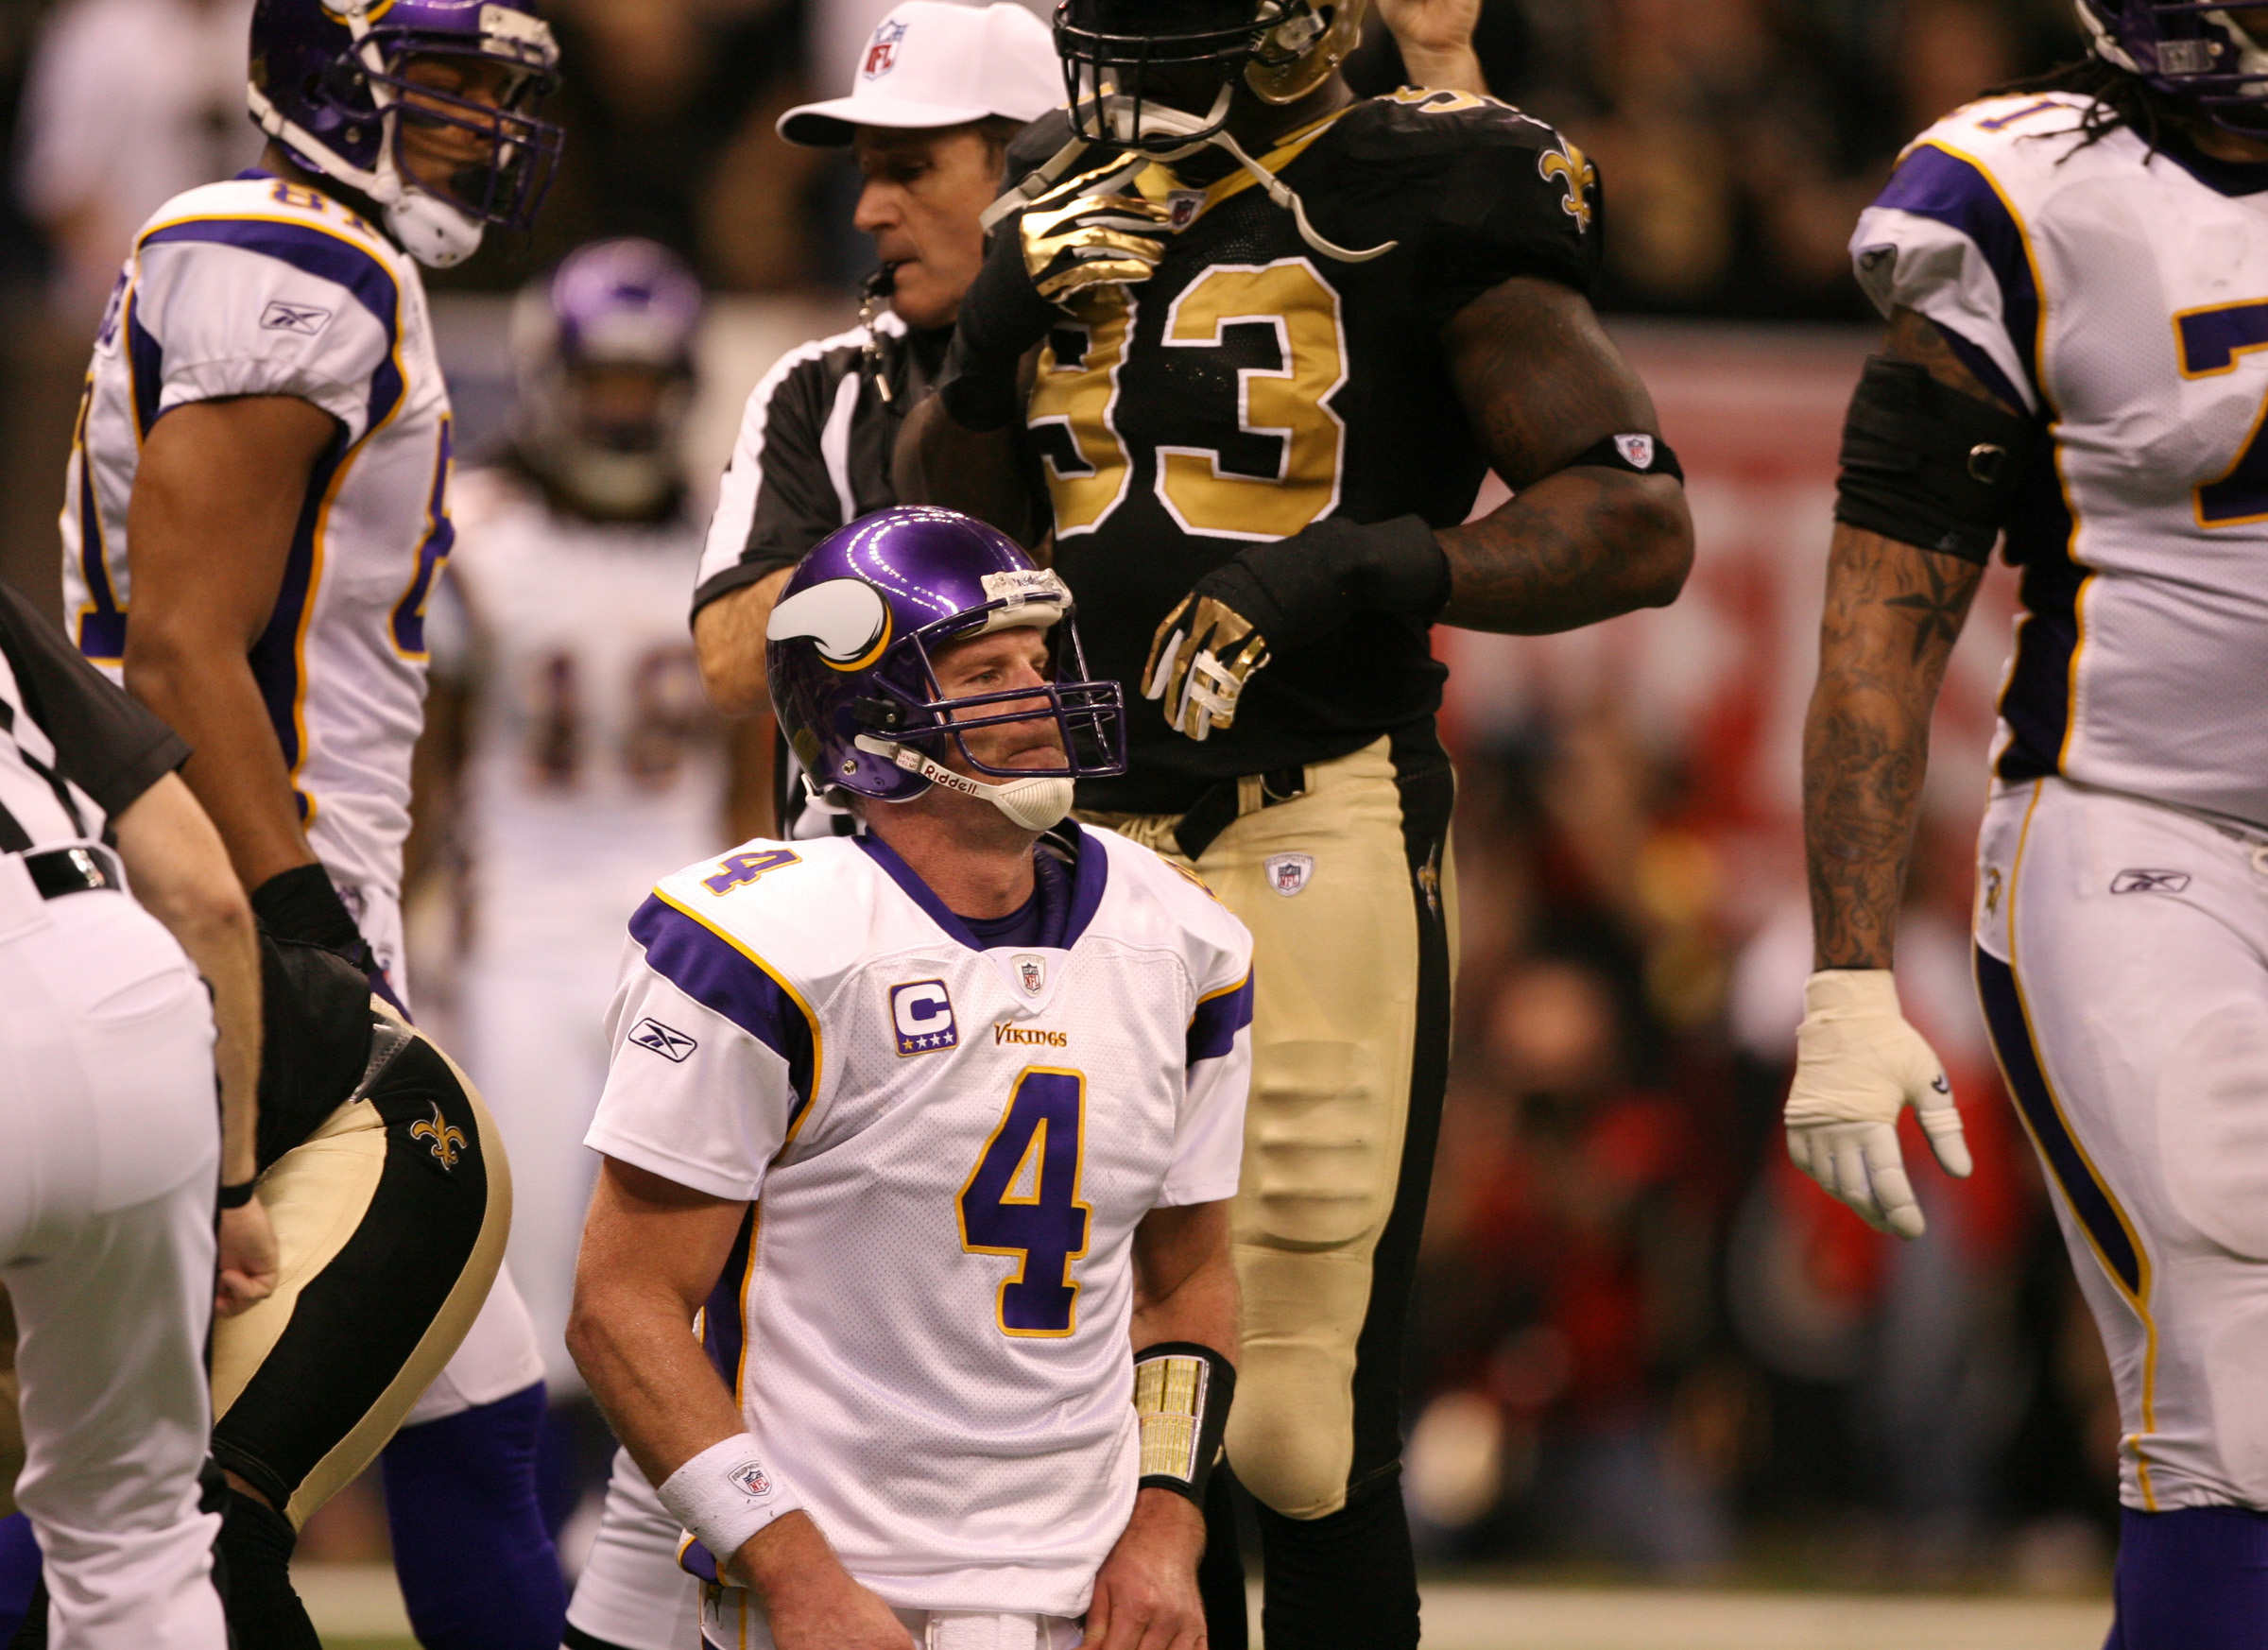 Brett Favre took quite a few extra hits against the New Orleans Saints in the 2010 NFC Championship Game.